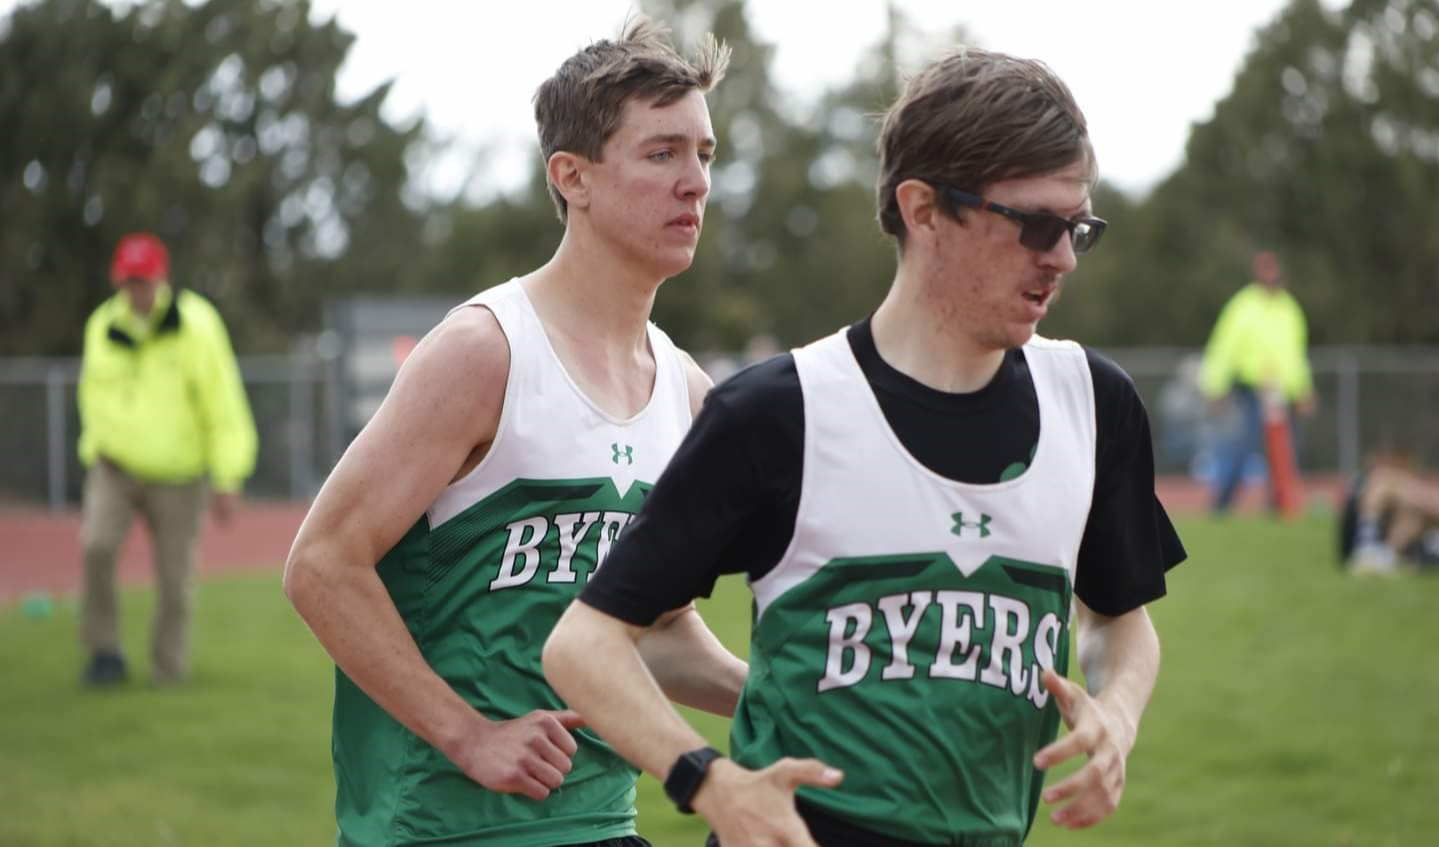 2 High School Track boys running the mile running the mile.